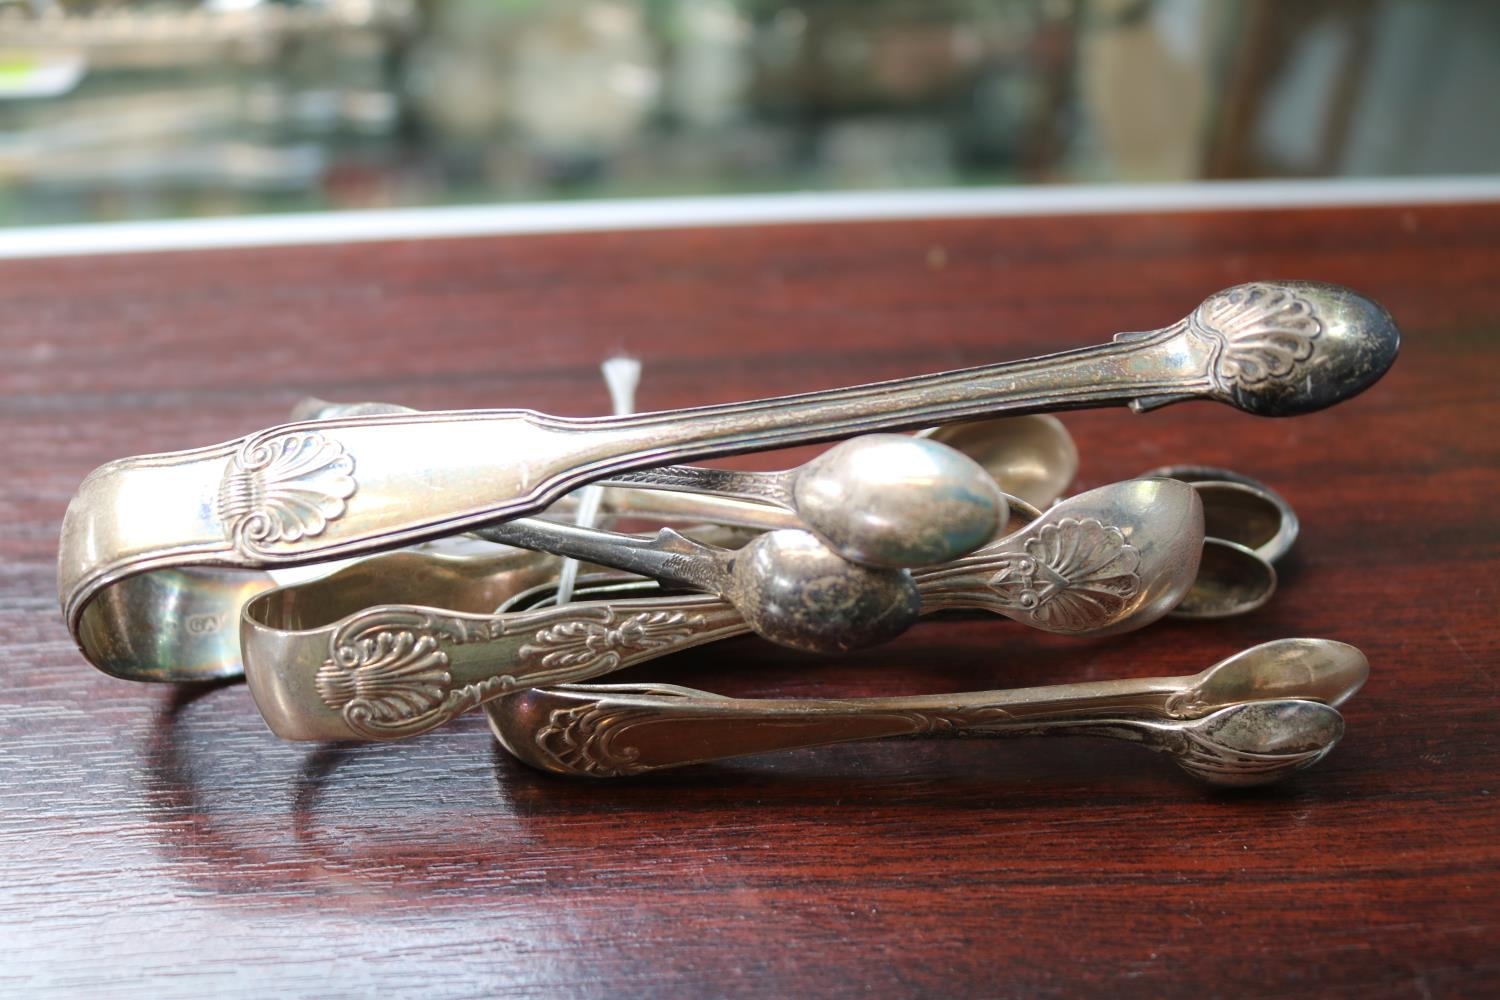 Collection of 6 Edwardian and later Silver Sugar tongs 178g total weight